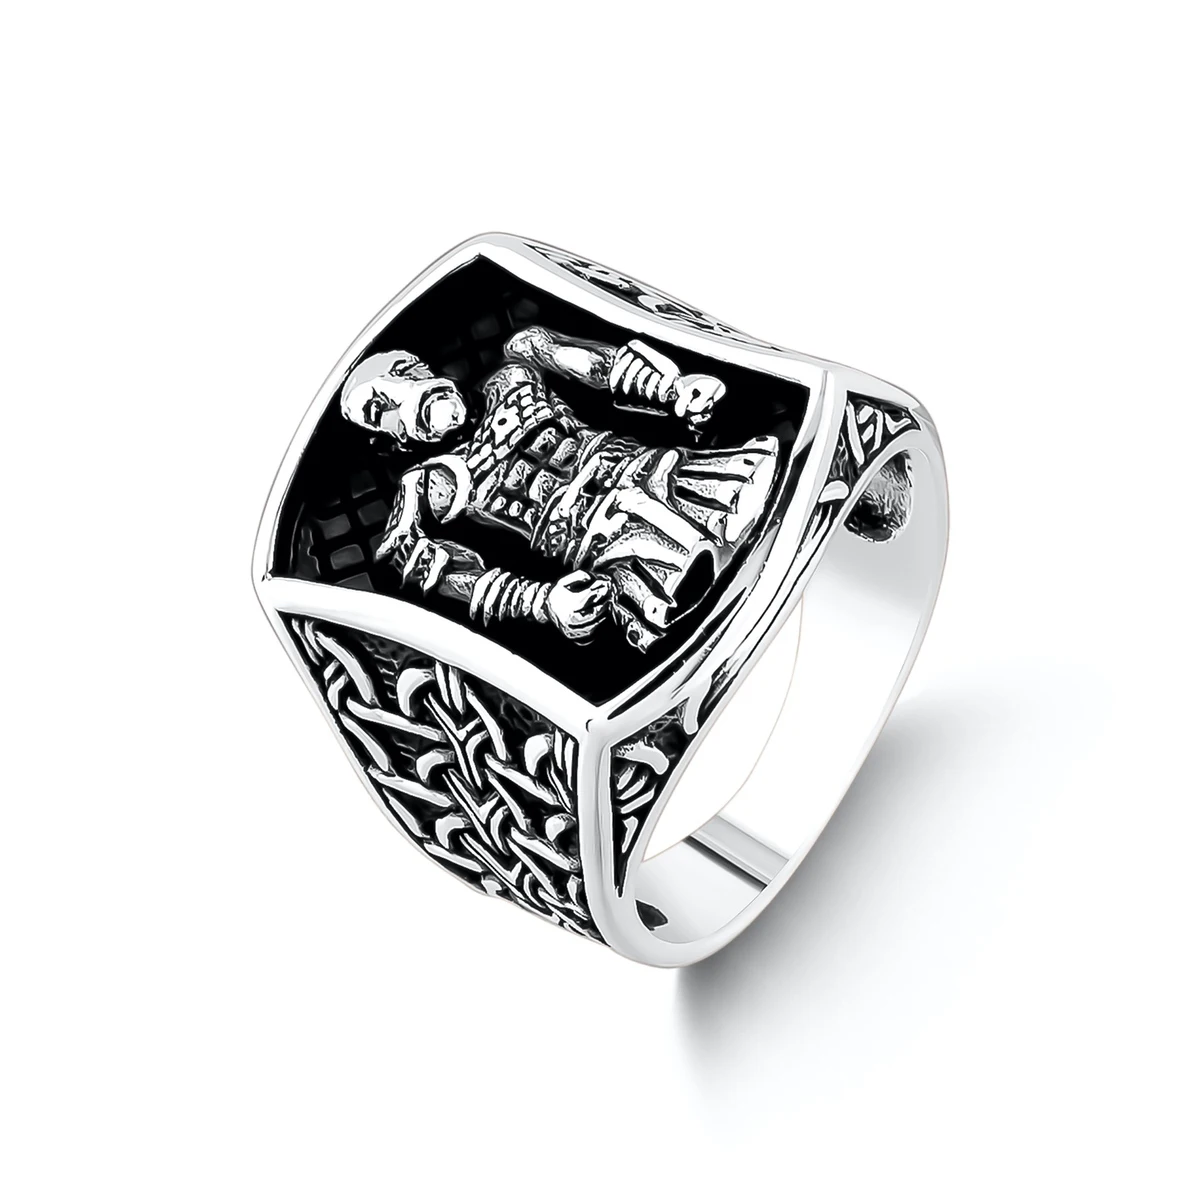 

Silver Men Soldier Model Ring Warrior Ring Handmade Men Jewelery Vintage Antique Accessory Solid 925 Sterling Silver